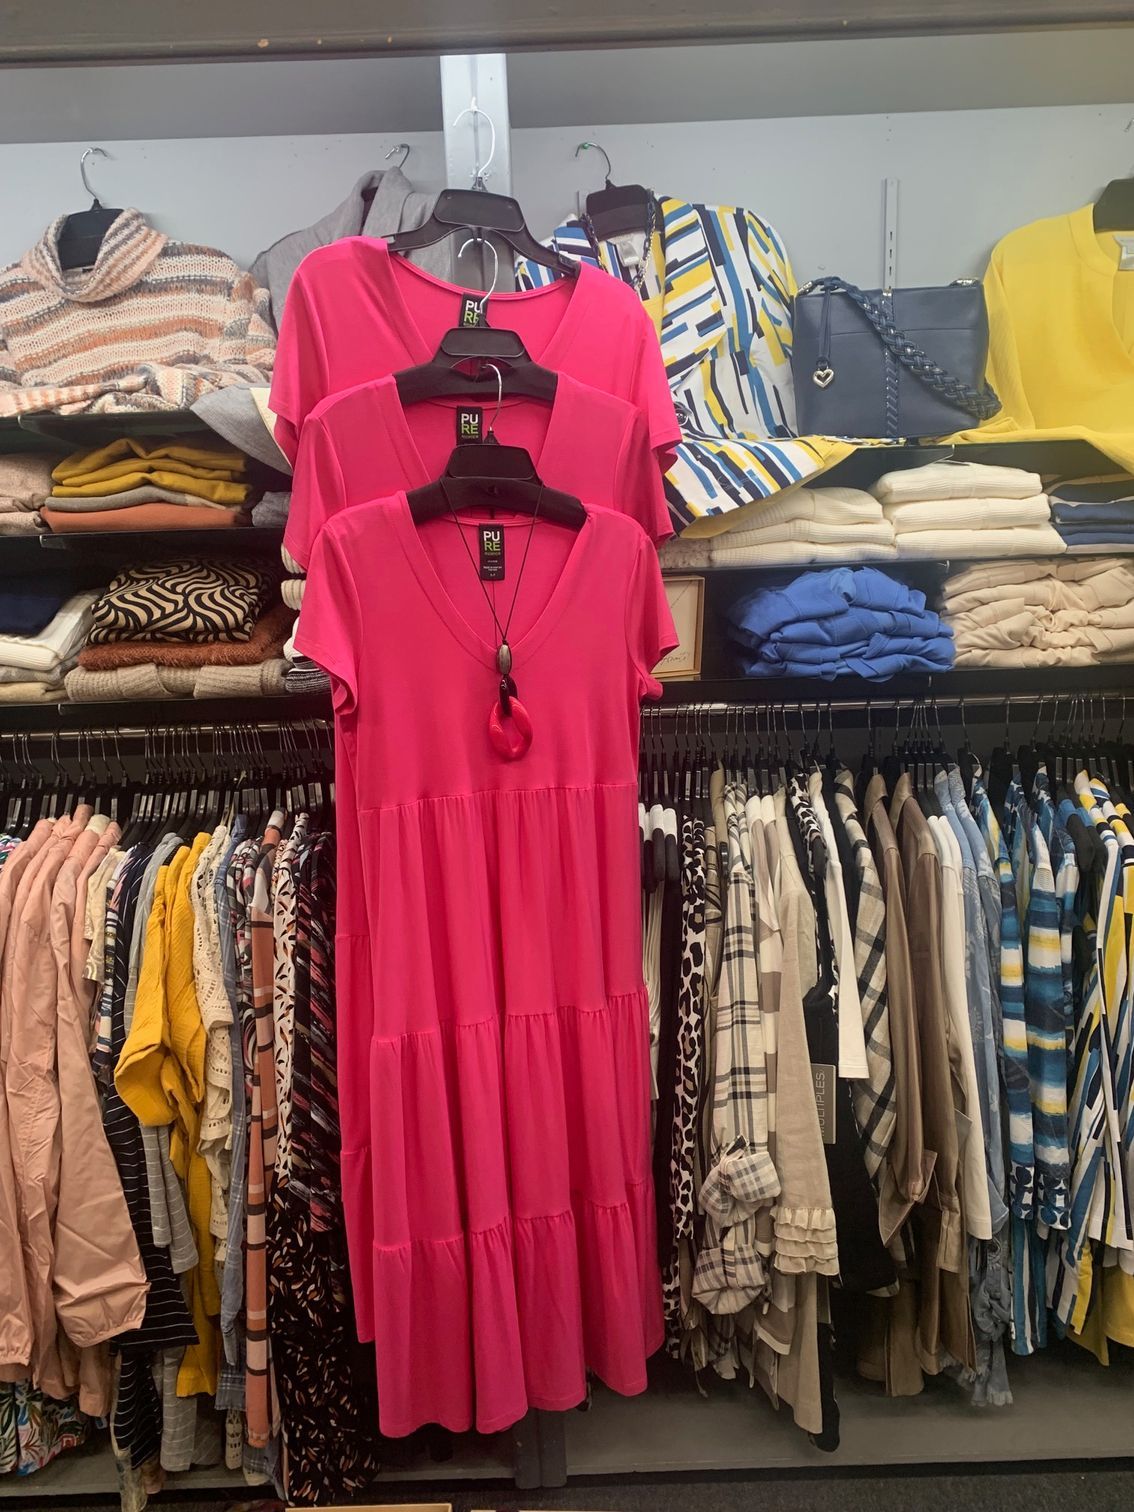 A pink dress is hanging on a rack in a clothing store.